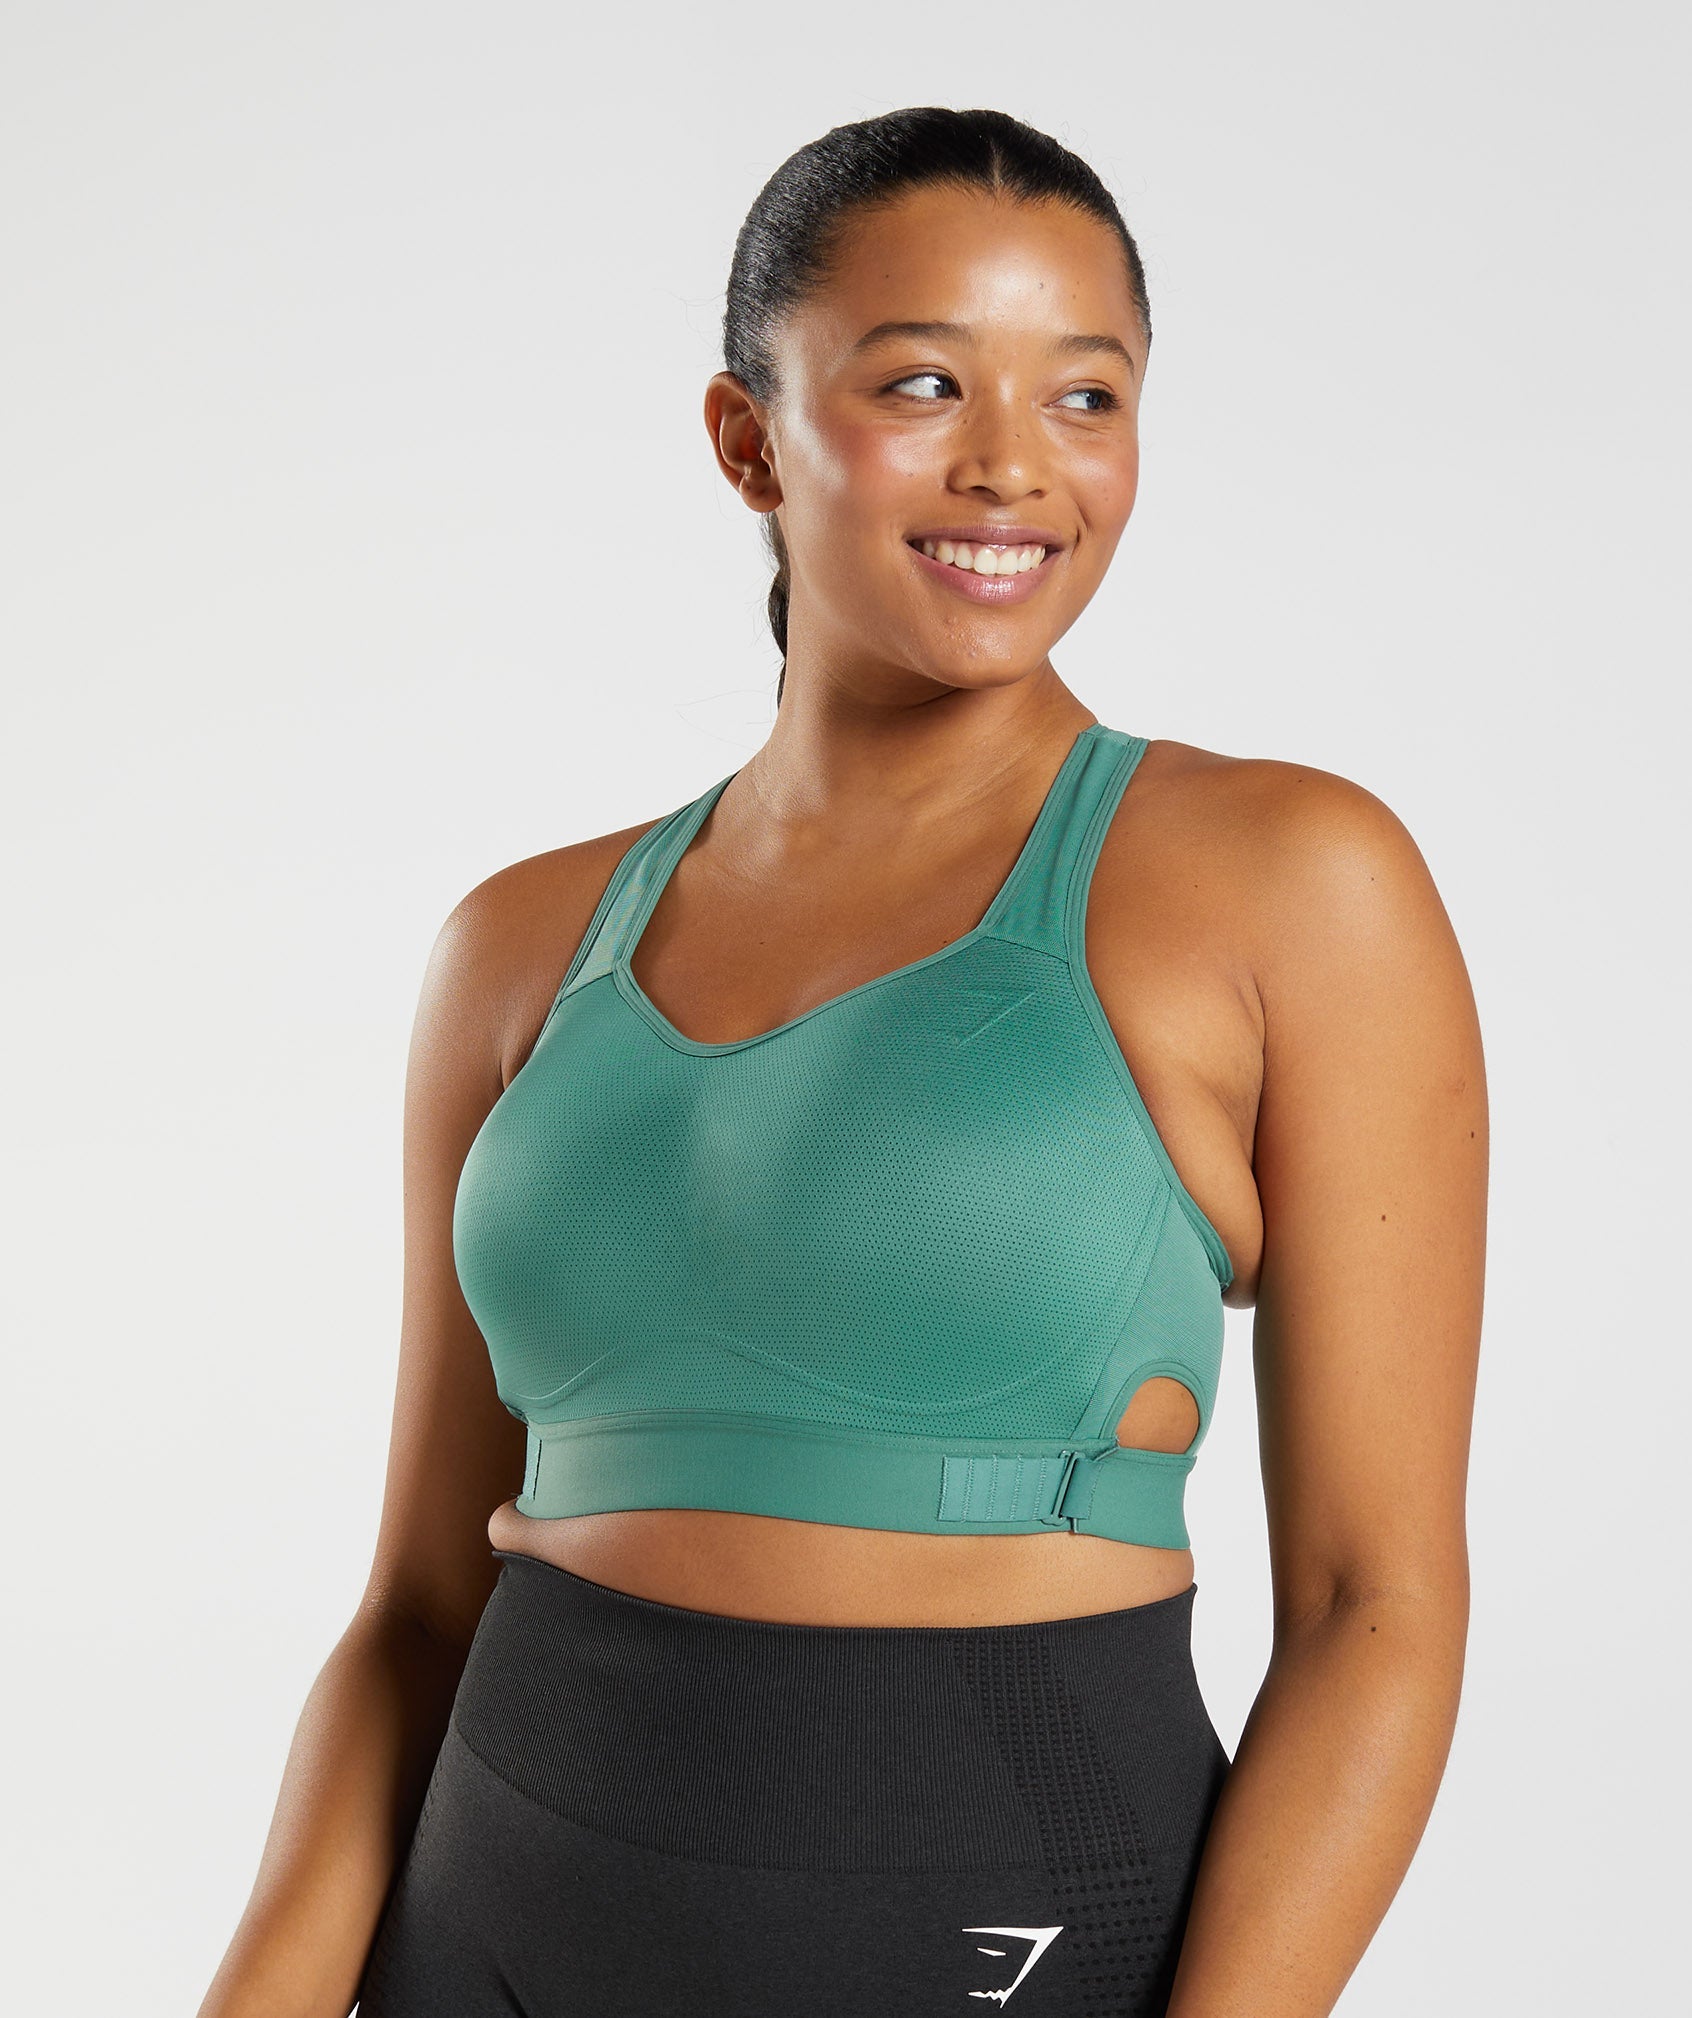  Centop High Impact Sports Bra Padded Seamless Workout Crop Top  Racerback Bra Yoga Gym Running Fitness Athletic Bra for Women Moss Green :  Clothing, Shoes & Jewelry